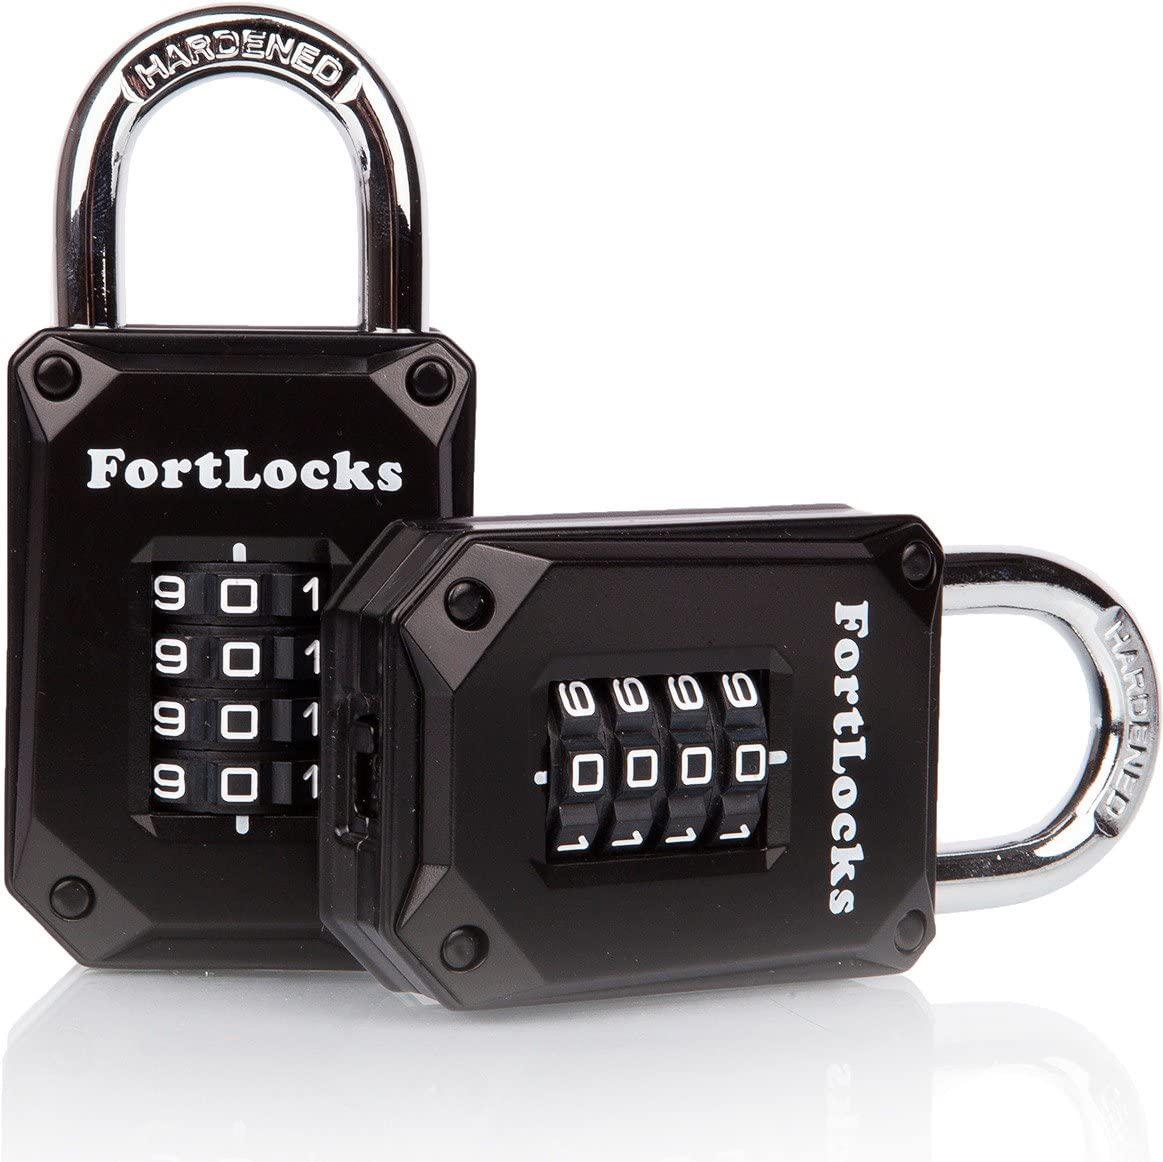 FortLocks, 2 Pack FortLocks Gym Locker Lock - 4 Digit, Heavy Duty, Hardened Stainless Steel, Weatherproof and Outdoor Combination Padlock - Easy to Read Numbers - Resettable and Cut Proof Combo Code - Black